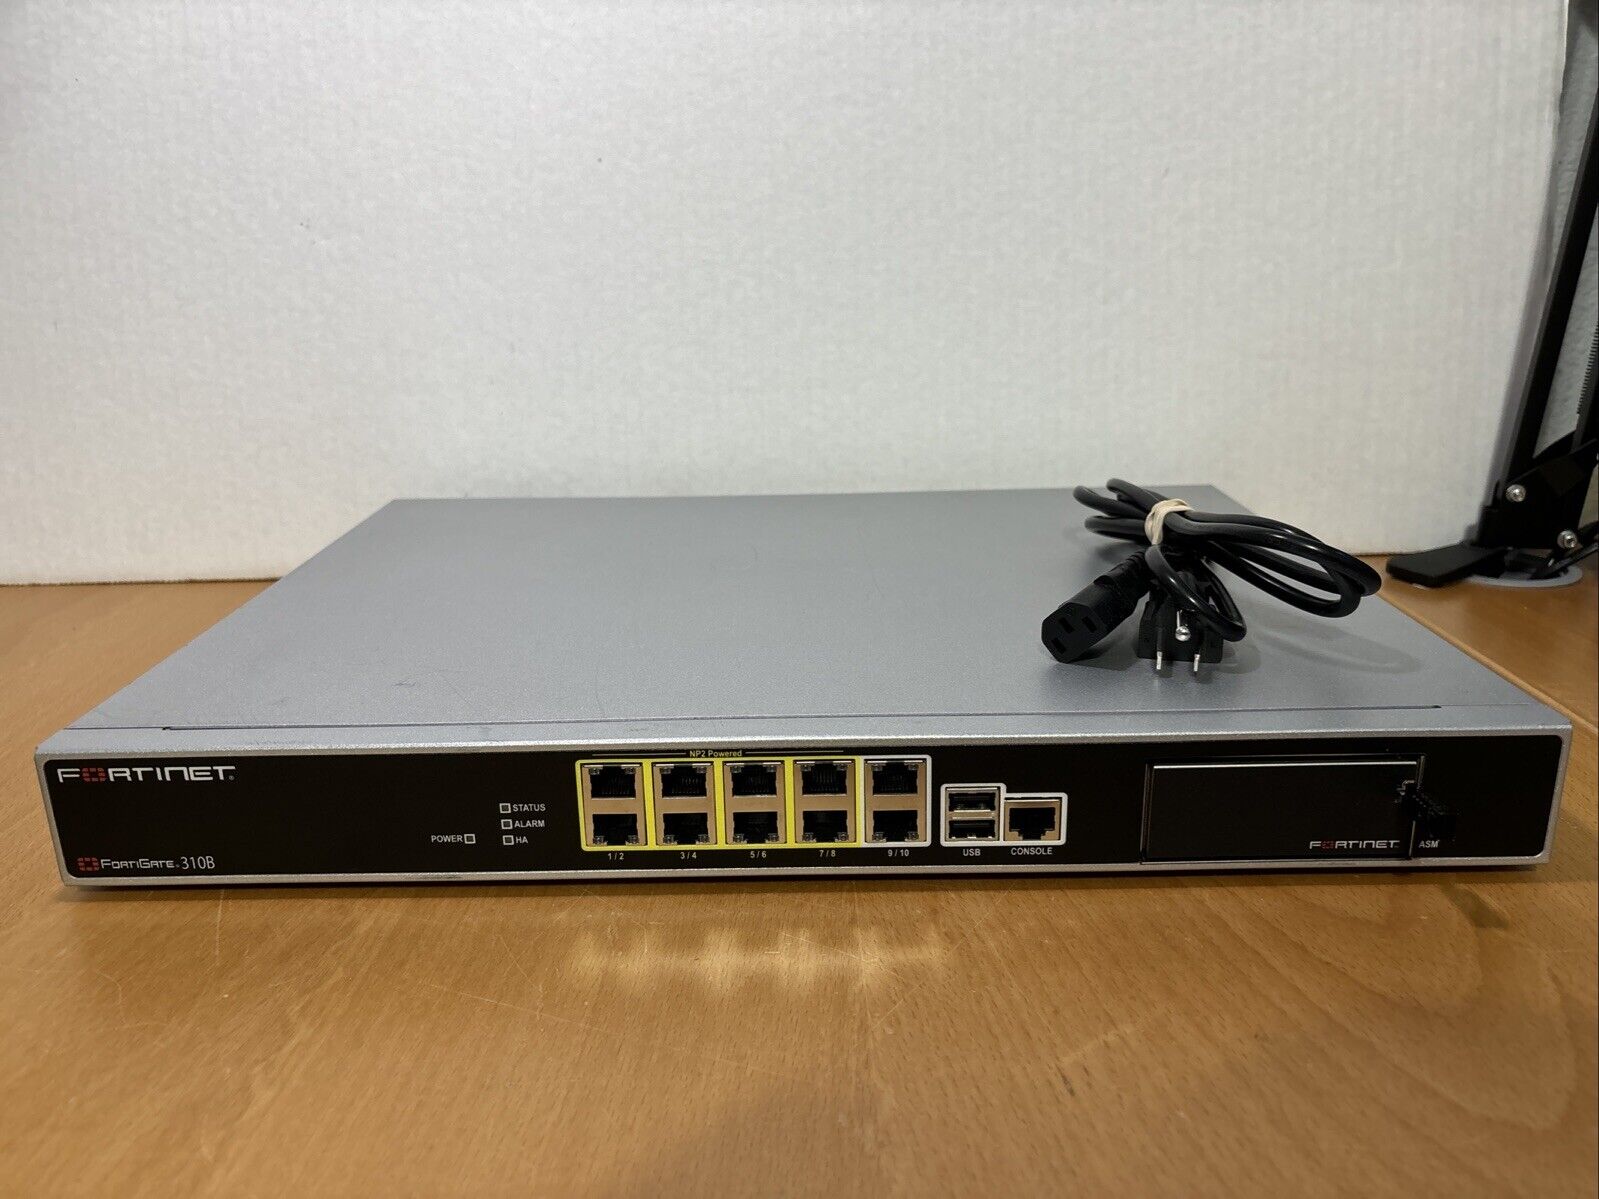 Fortinet FortiGate 310B Security Appliance, P04380-07-04